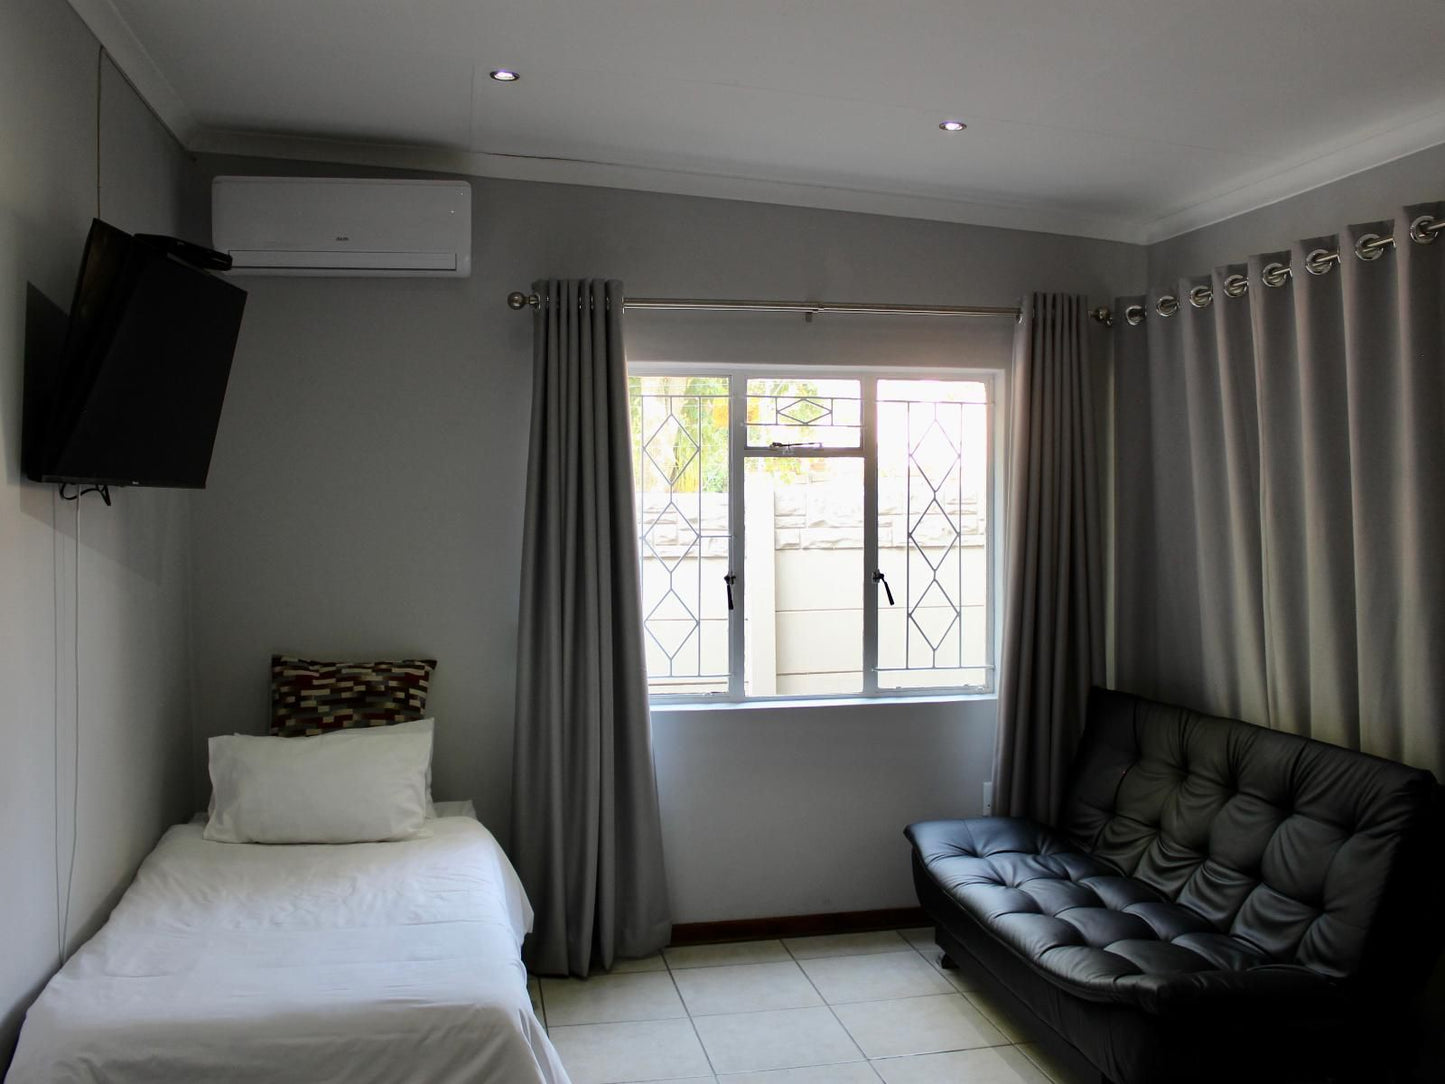 The Executive House Newcastle Central Newcastle Kwazulu Natal South Africa Unsaturated, Bedroom